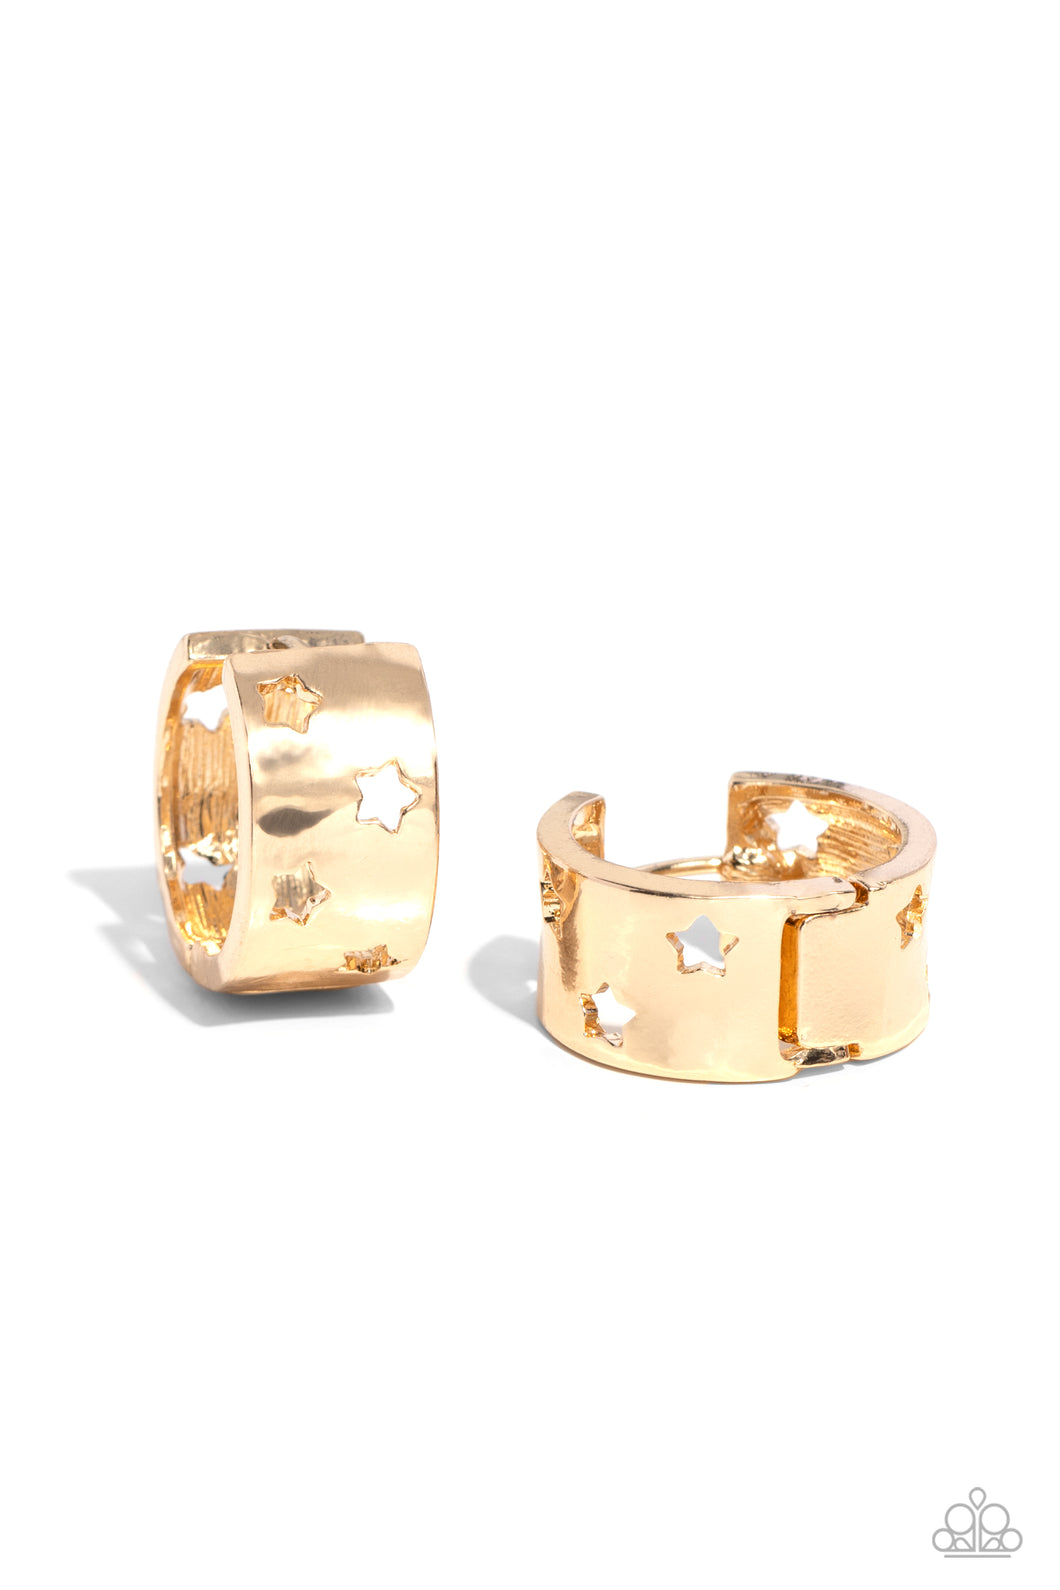 oak-sisters-jewelry-setting-the-star-high-gold-earrings-paparazzi-accessories-by-lisa